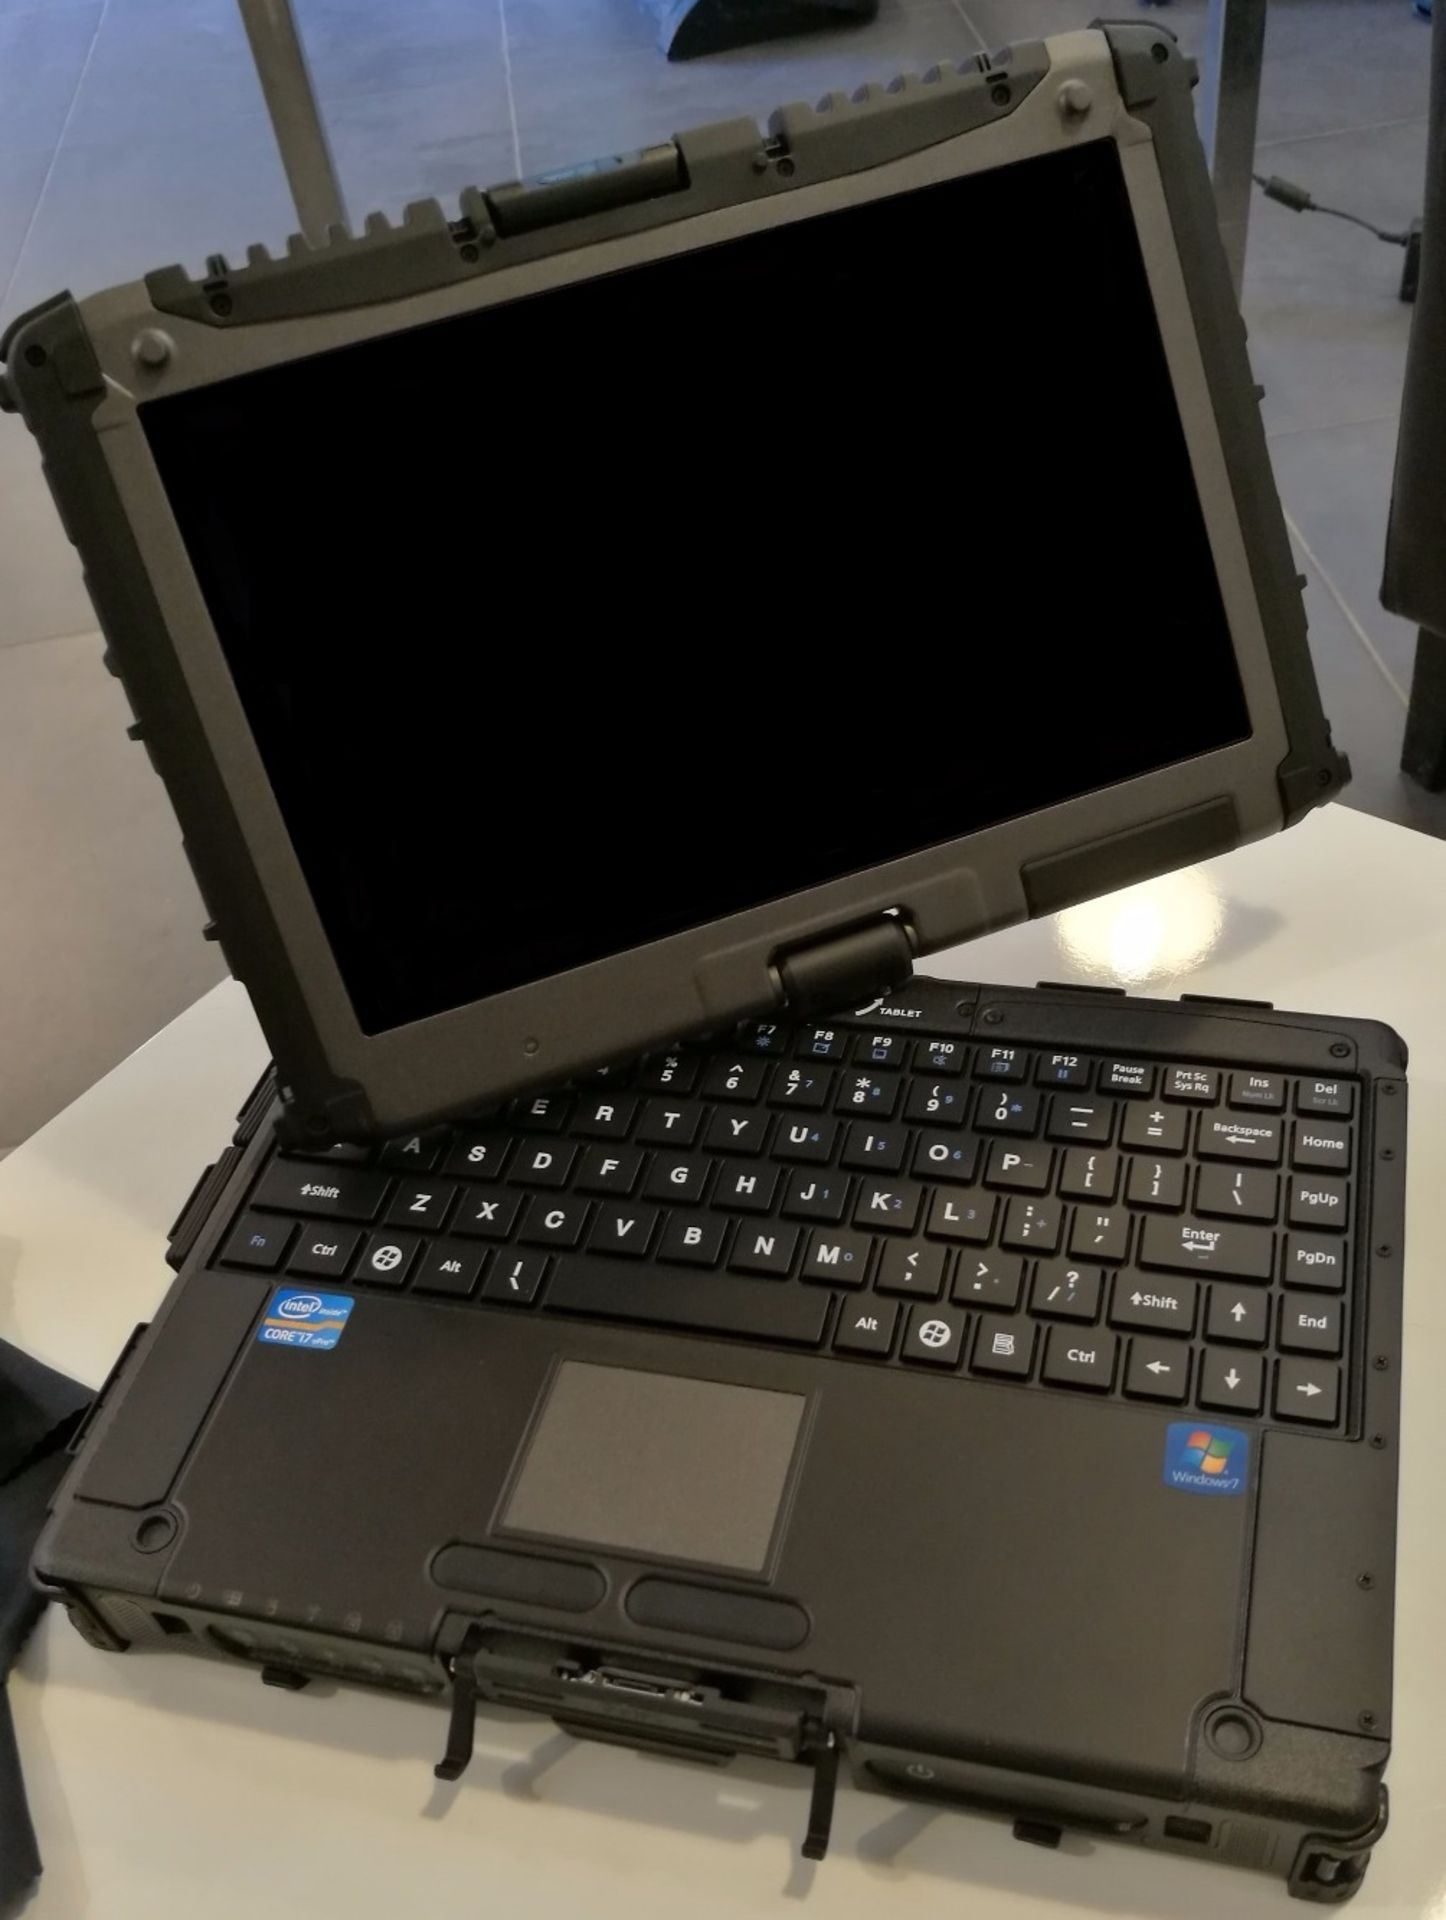 1 x Getac V200 Rugged Laptop Computer - Rugged Laptop That Transforms into a Tablet PC - Features an - Image 2 of 15